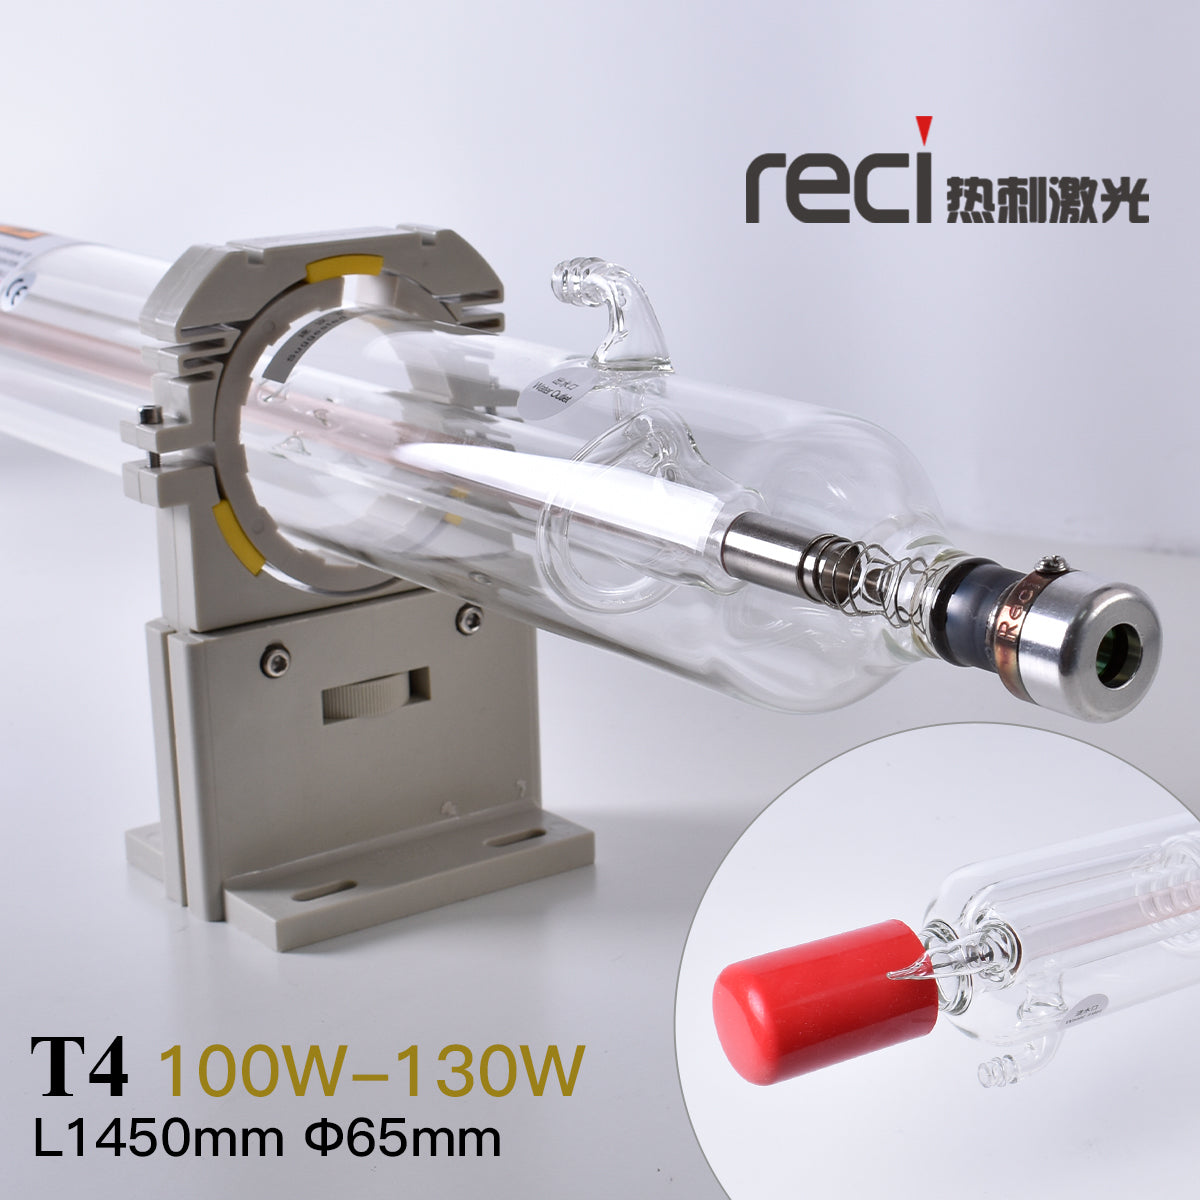 New T4 W4 CO2 Laser Tube T4 Reci 130W 120W D65mm Wooden Box Packing For 100W CO2 Laser Engraving Cuting Machine Lamp Spare Parts